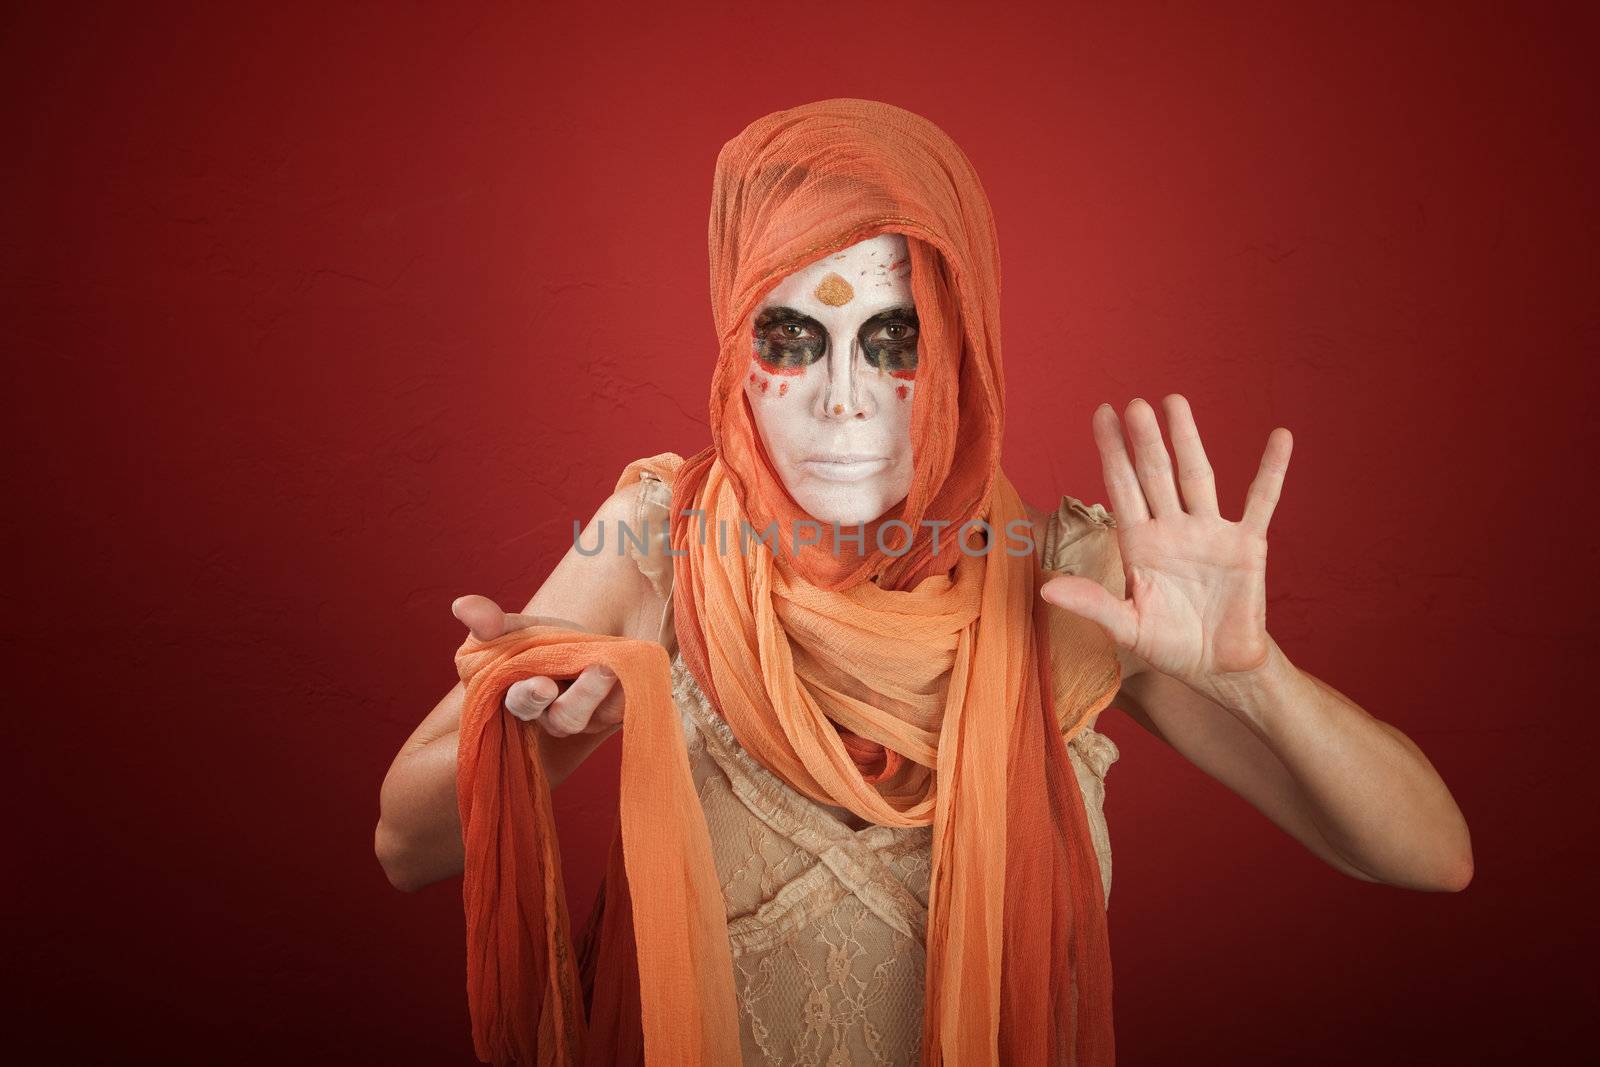 Woman on a Halloween Costume by Creatista